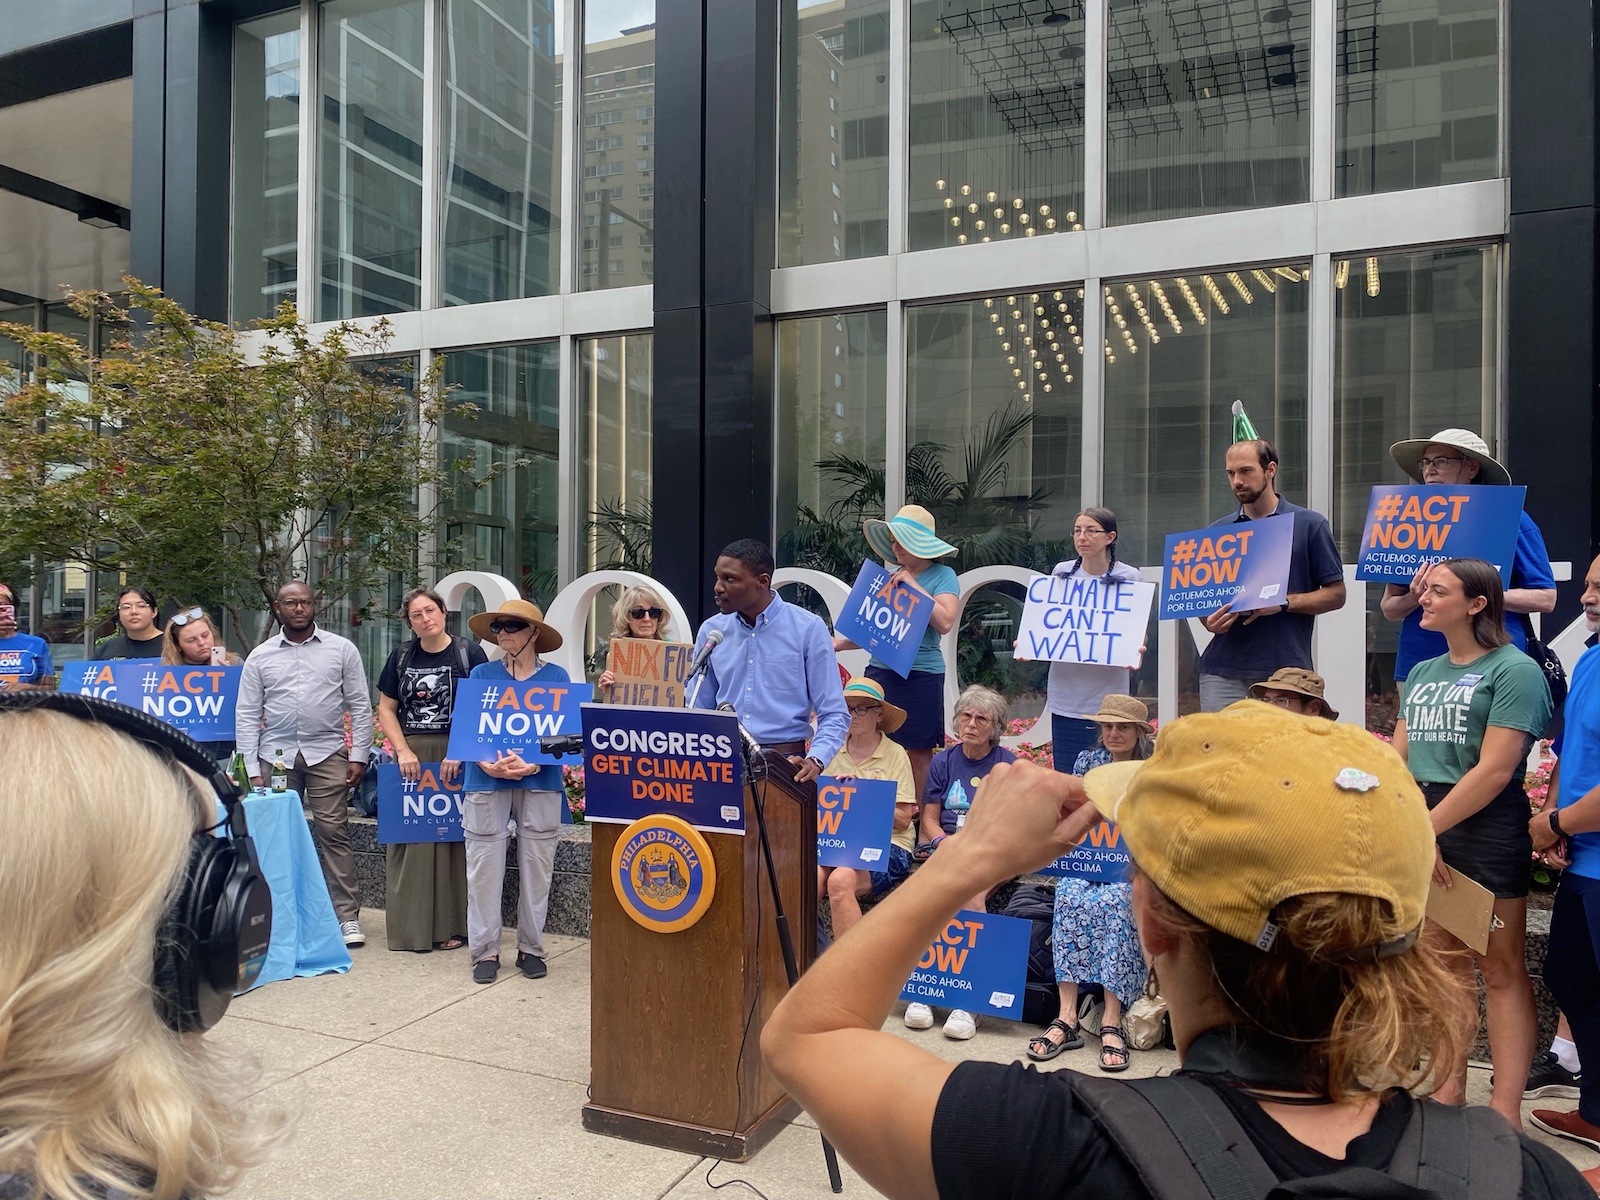 Christopher Johnson, a regional representative for U.S. Senator Bob Casey, stands speaking at a podium in front of a crowd of people holding signs that say "Act Now on Climate"